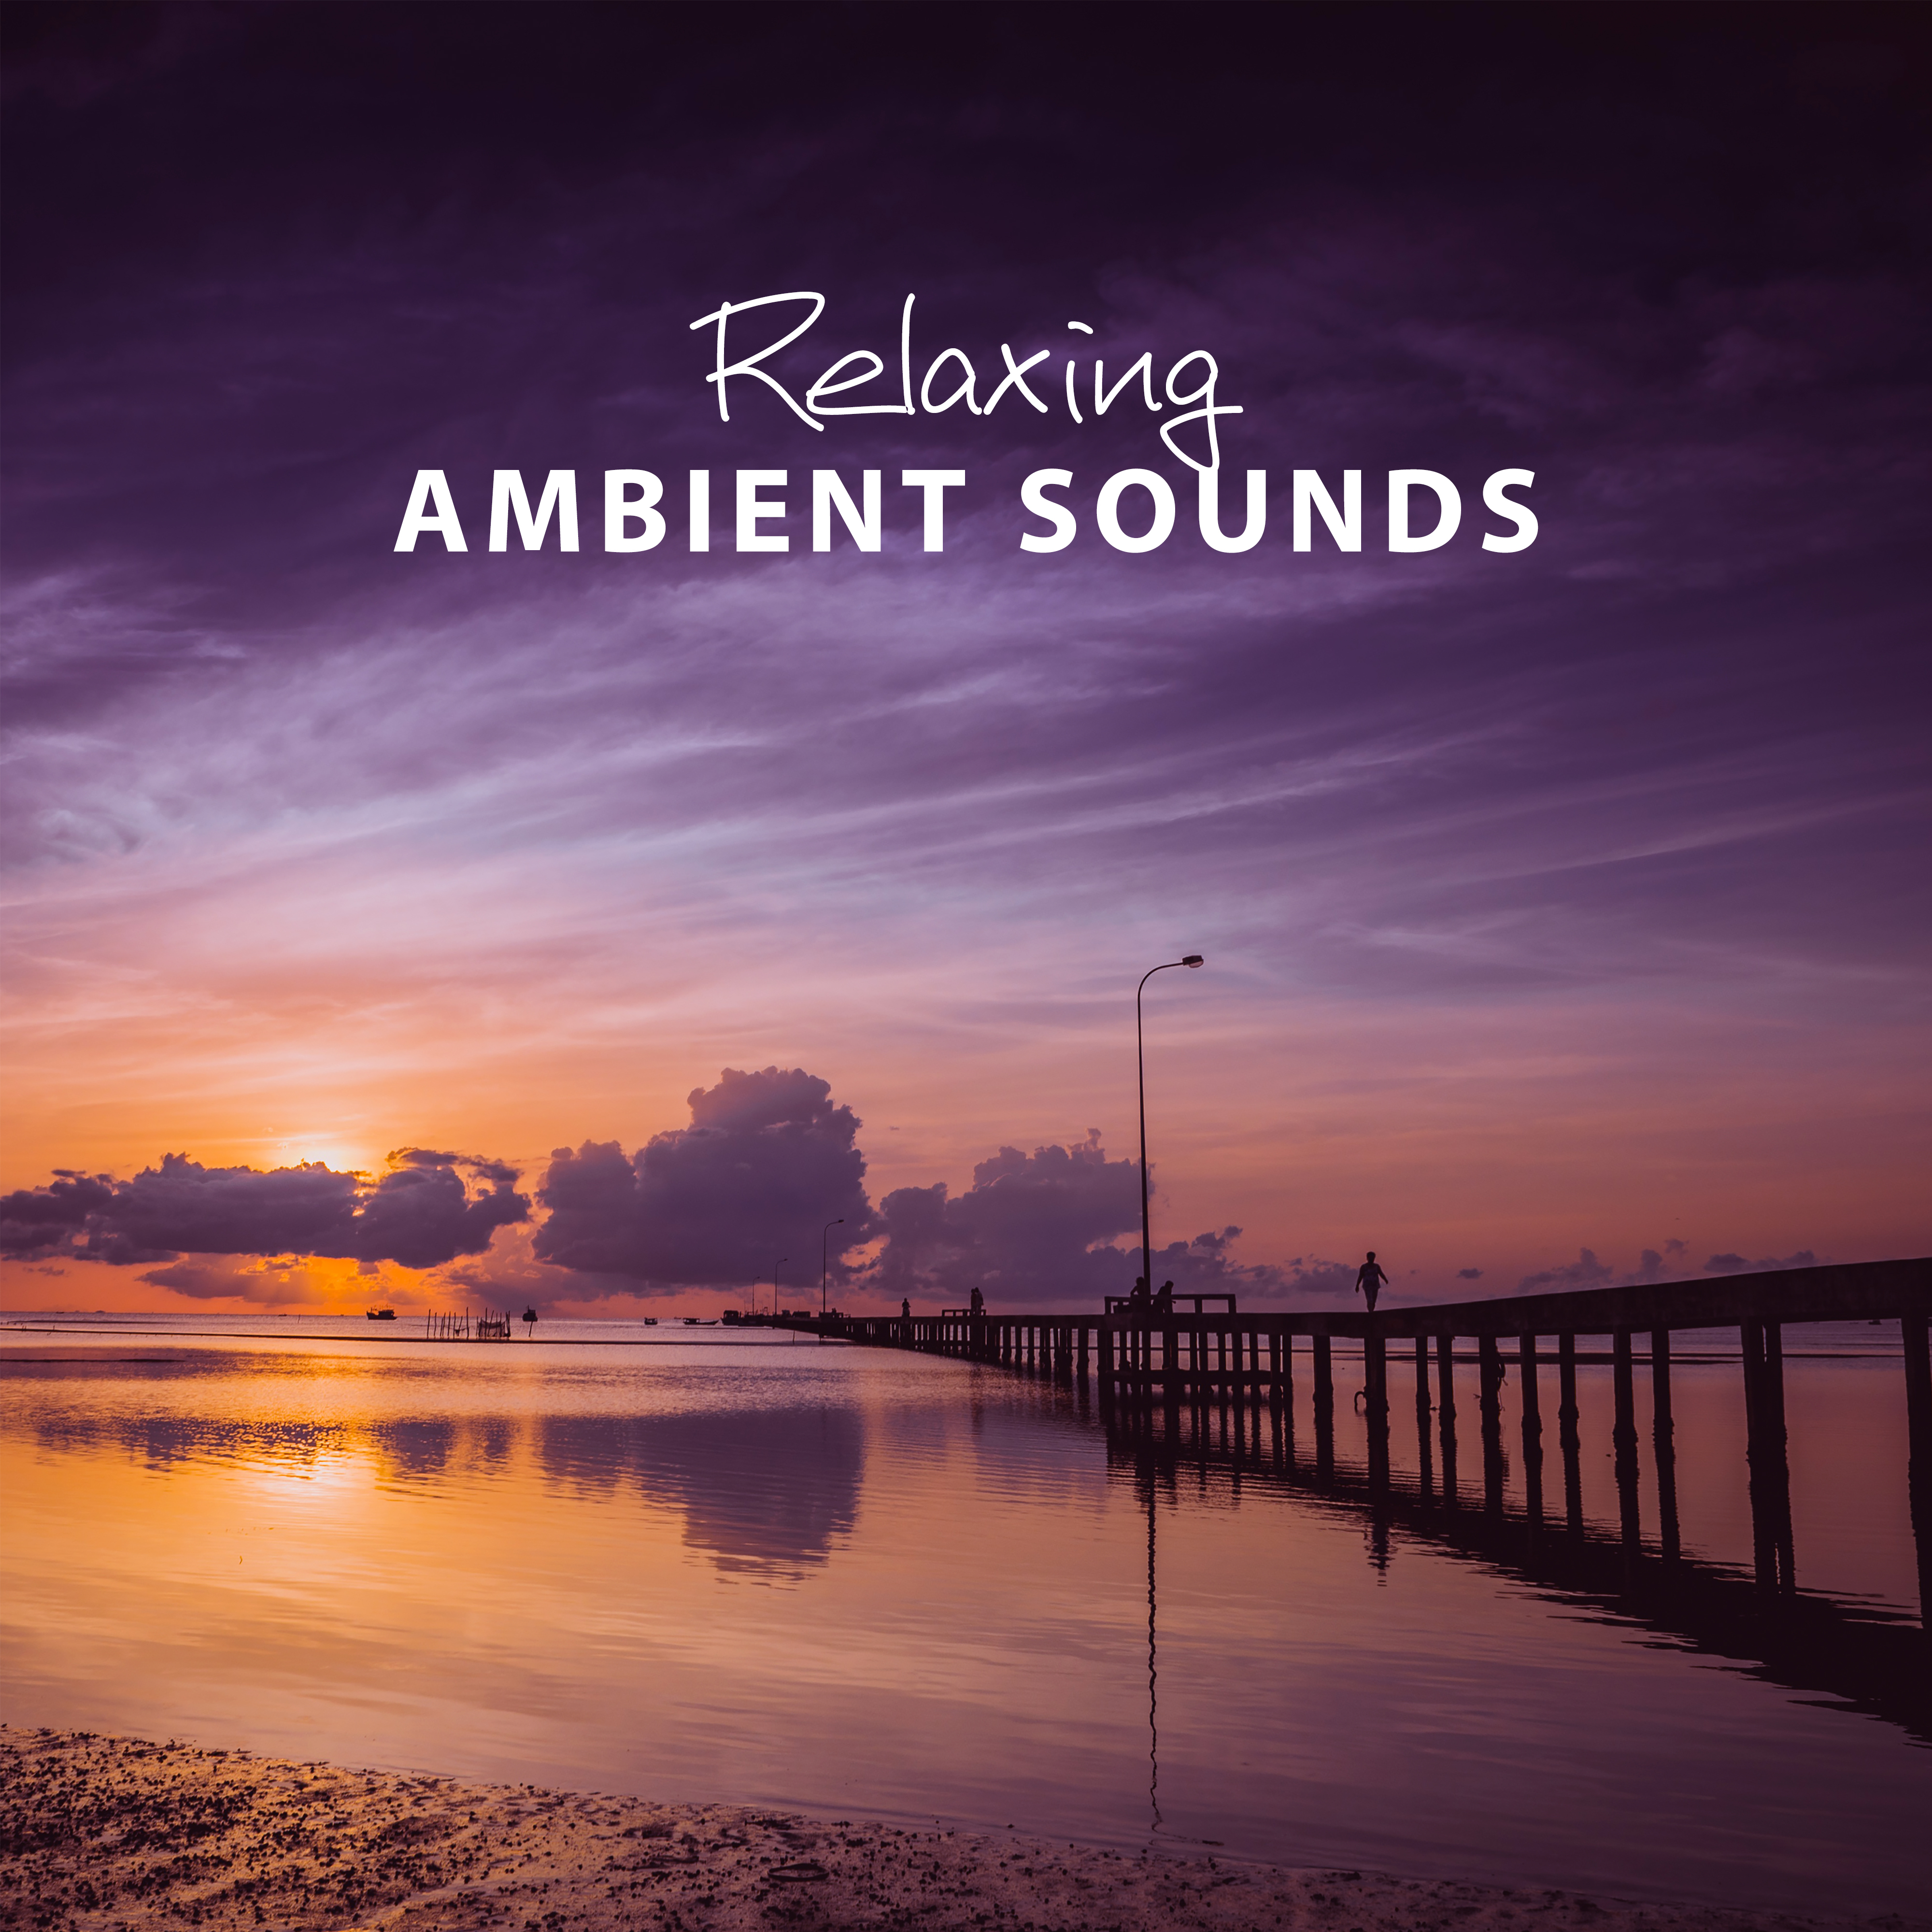 Relaxing Ambient Sounds – Soothing Sounds to Rest, Relaxing Music, Inner Journey, Sweet Dreams